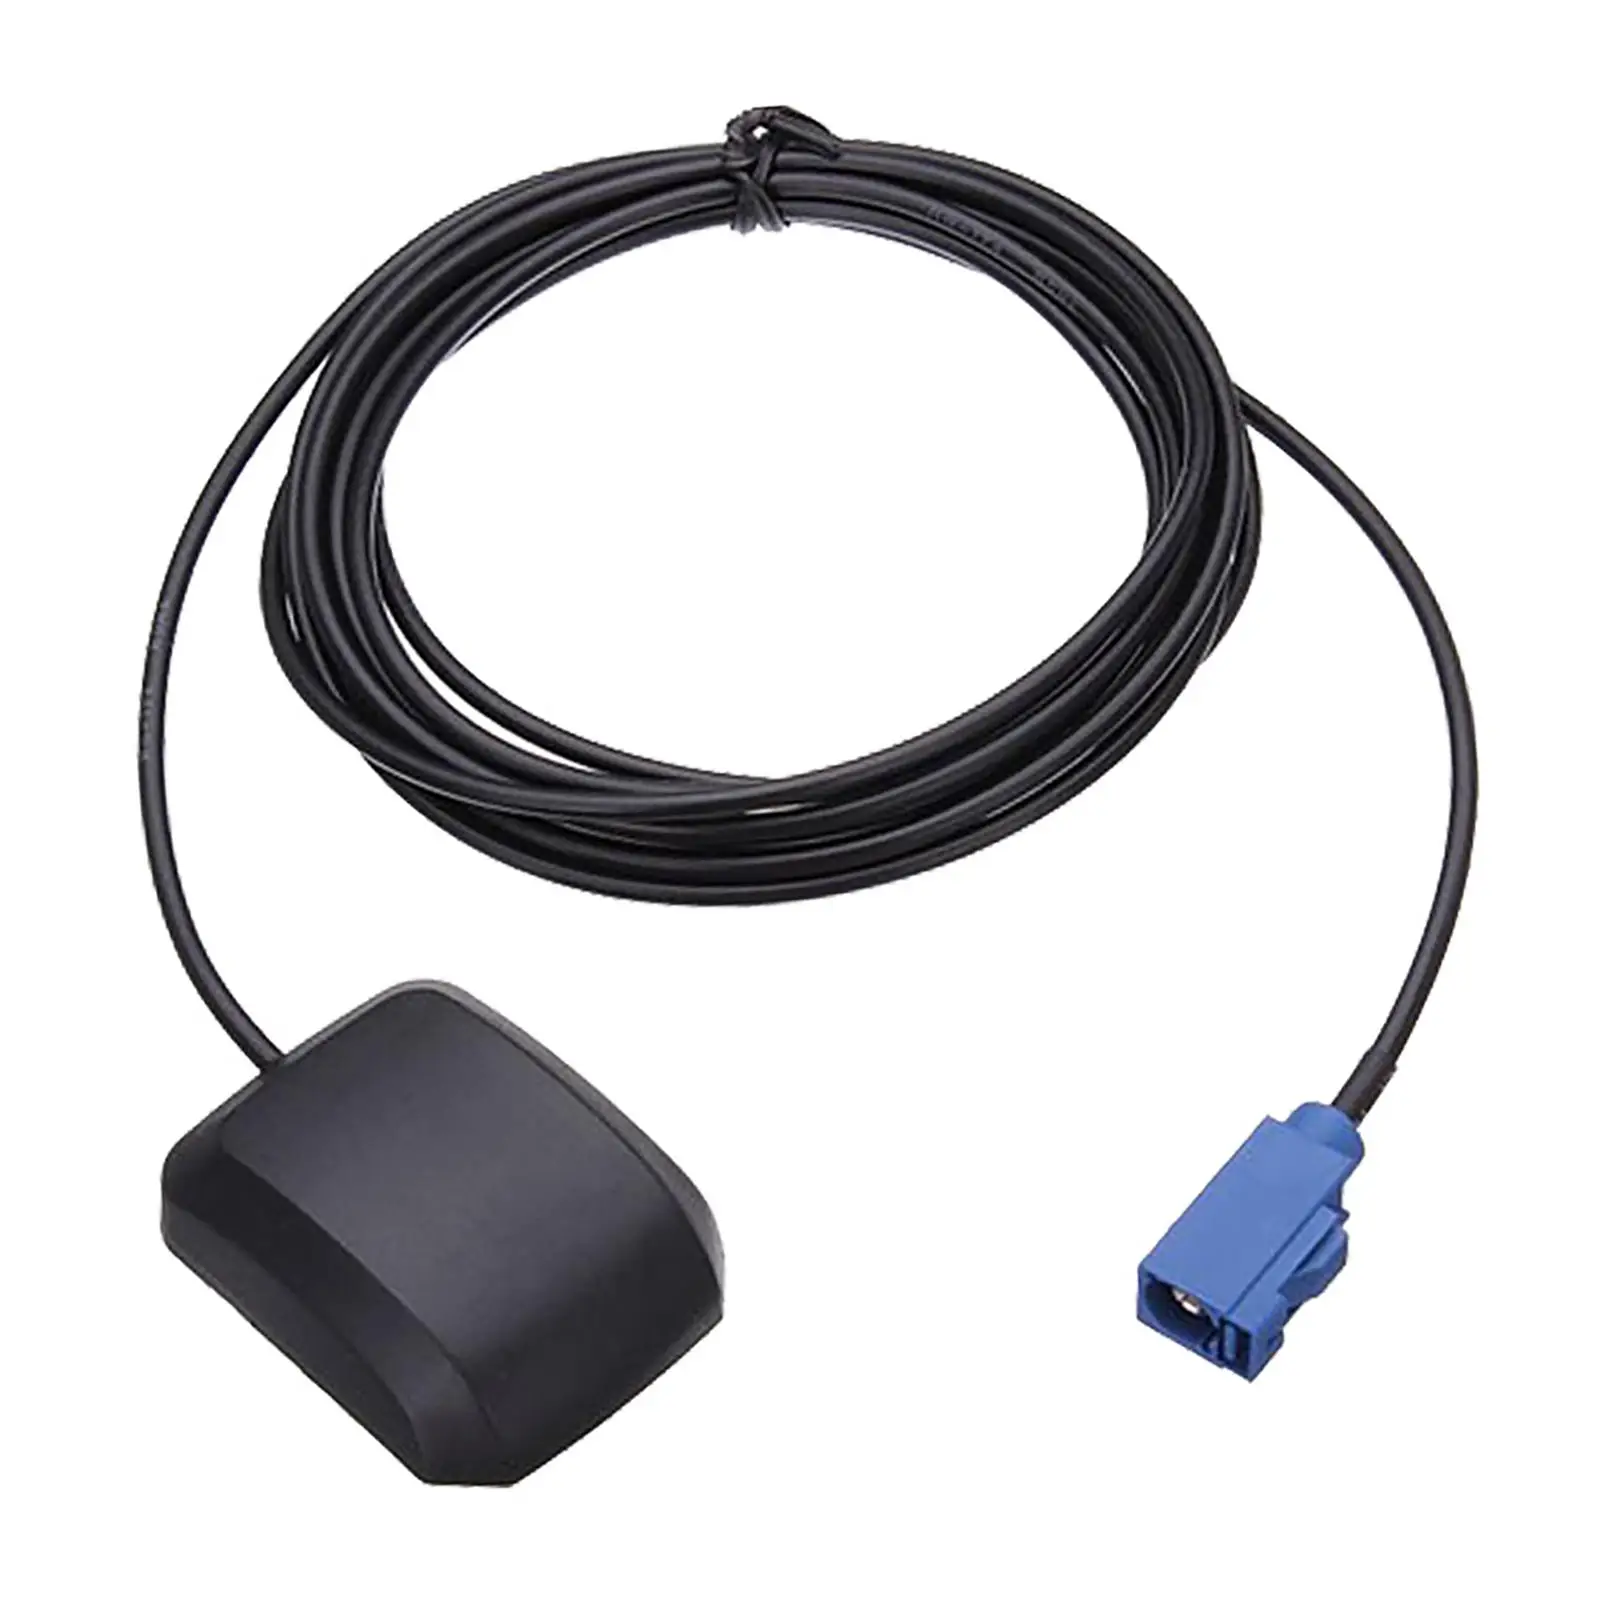 Vehicle Active Navigation with SMA Male Connector Real Time Tracking for Car Truck SUV Stereo Replacement